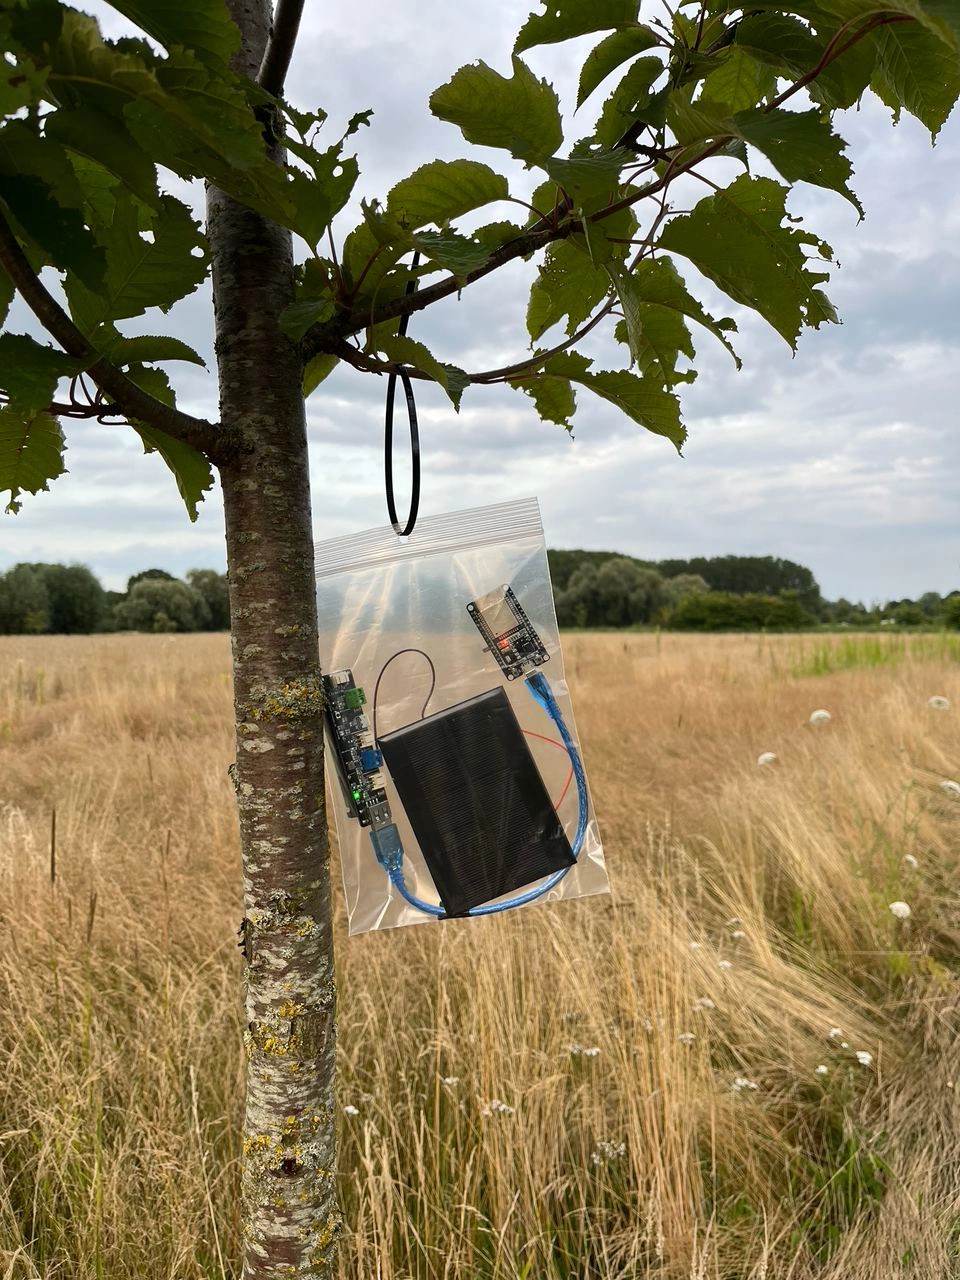 some physical computing devices inside a plastic bag which is tied to a tree